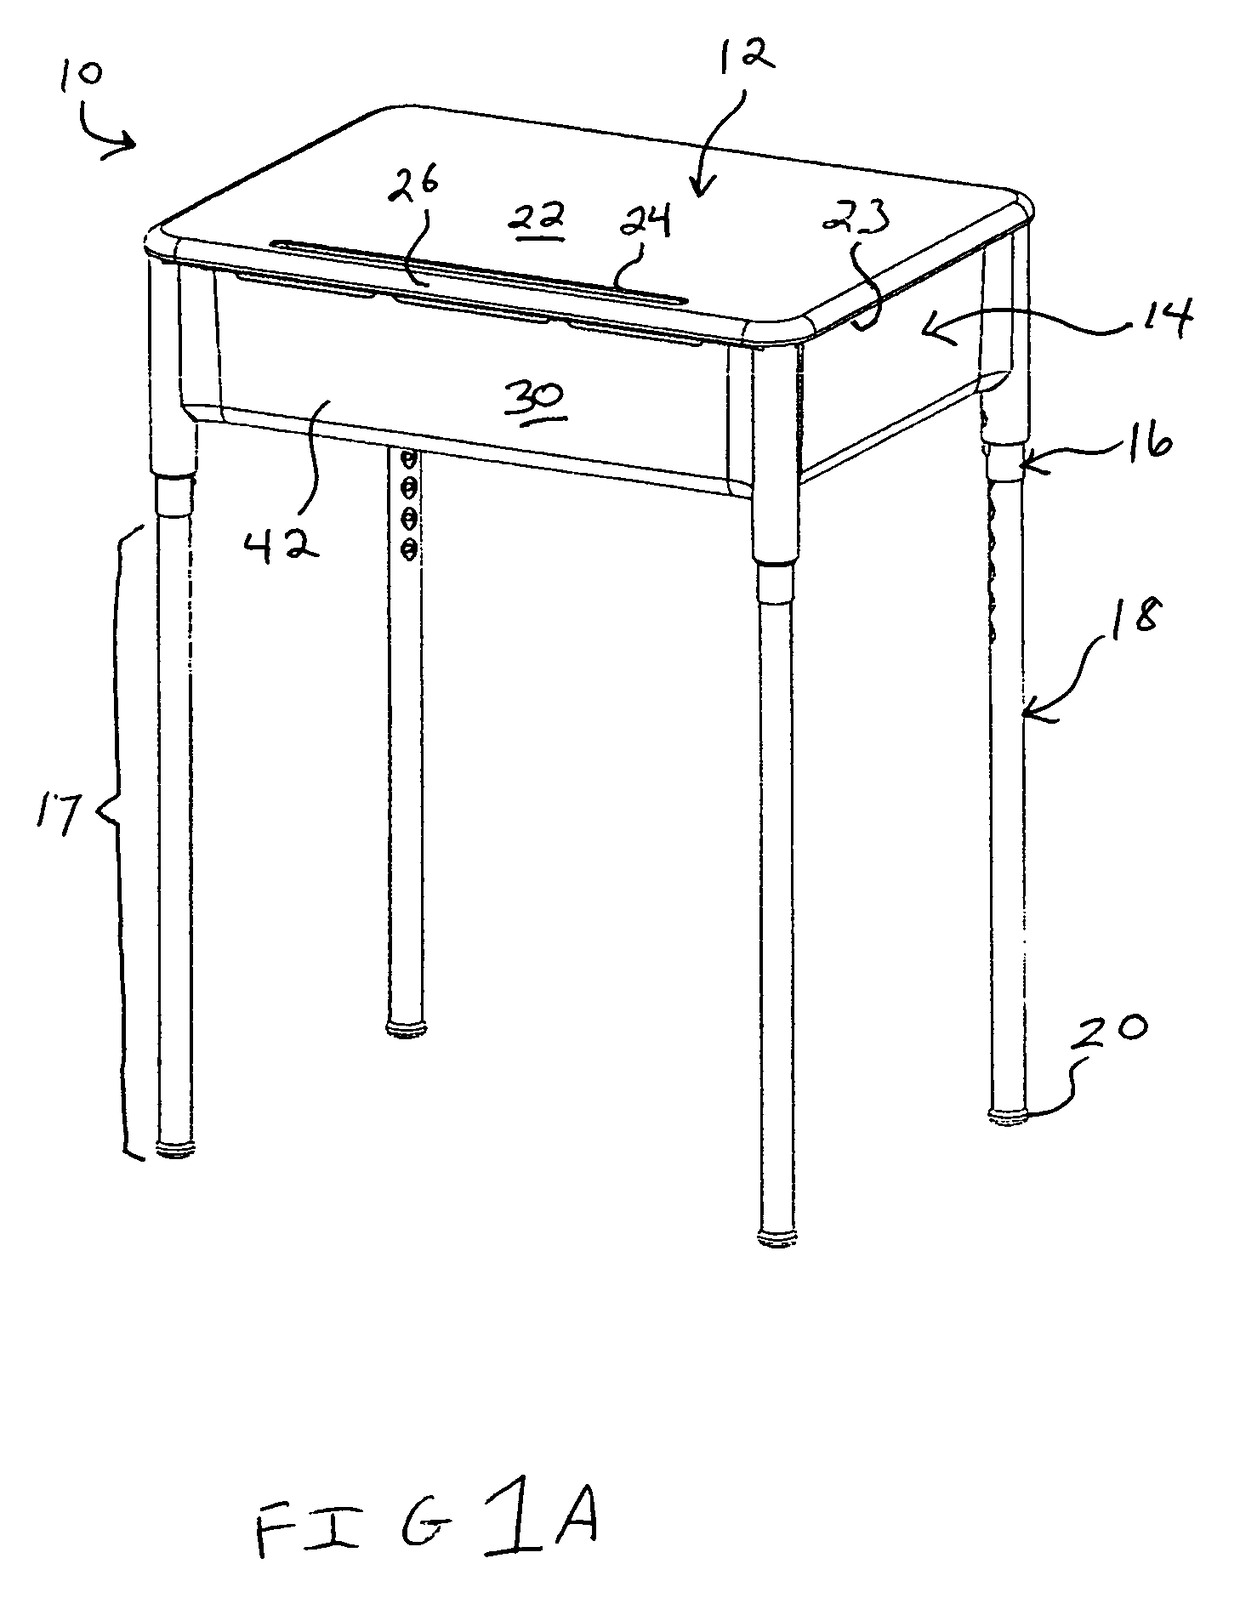 Height adjustable desk configured for stacking with legs detached